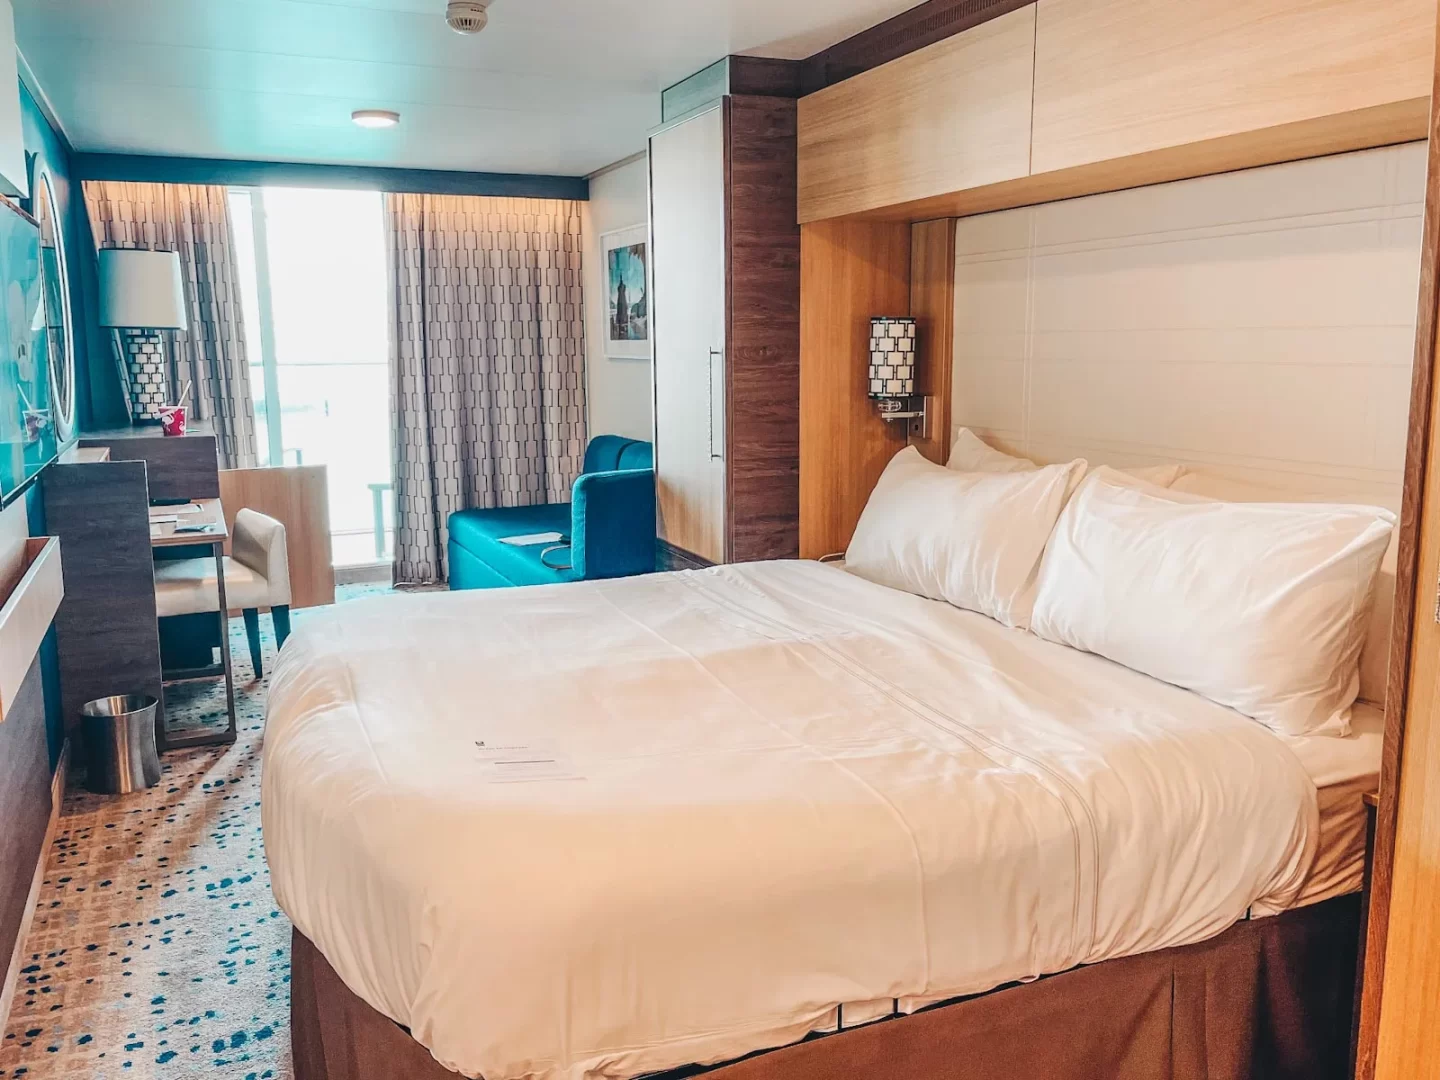 A weekend trip on Anthem of the Seas, a Qauntum Class Ship Cabin